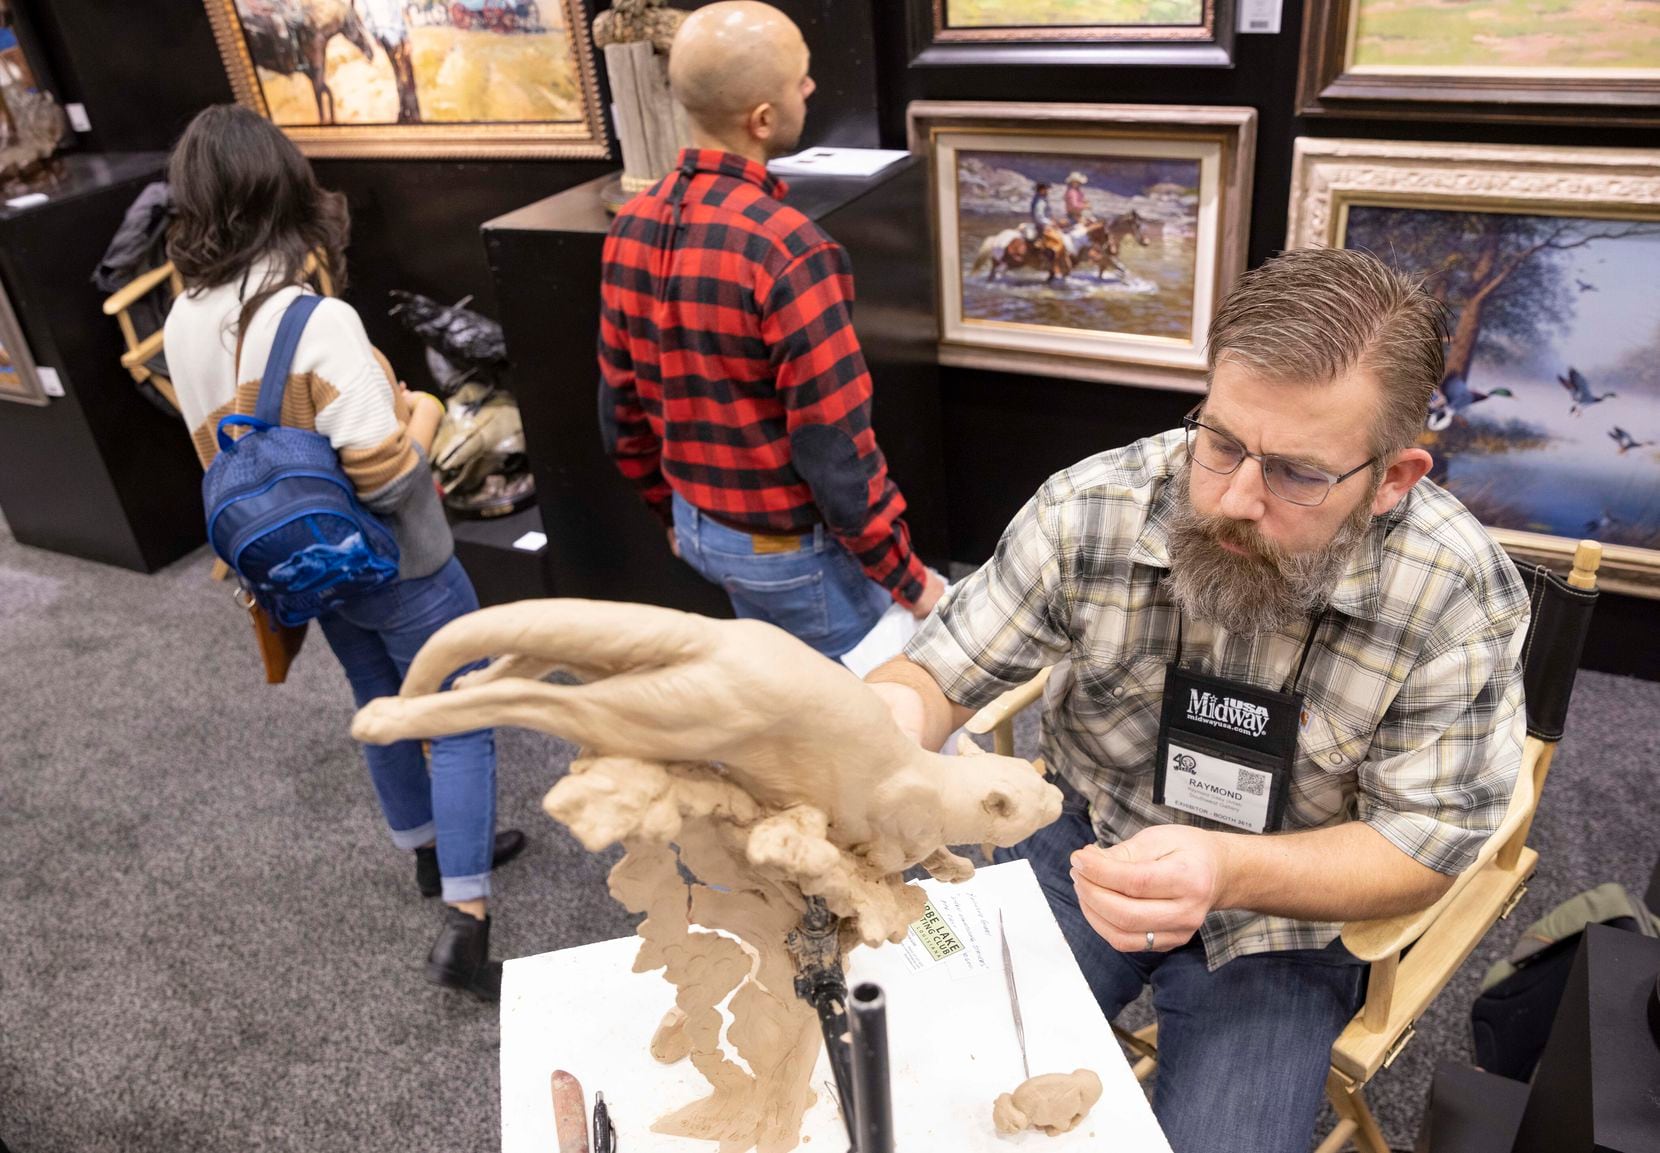 Raymond Gibby of Utah works on a sculpture as people browse the Southwest Gallery booth during the Dallas Safari Club Convention and Sporting Expo at Kay Bailey Hutchison Convention Center on Friday.